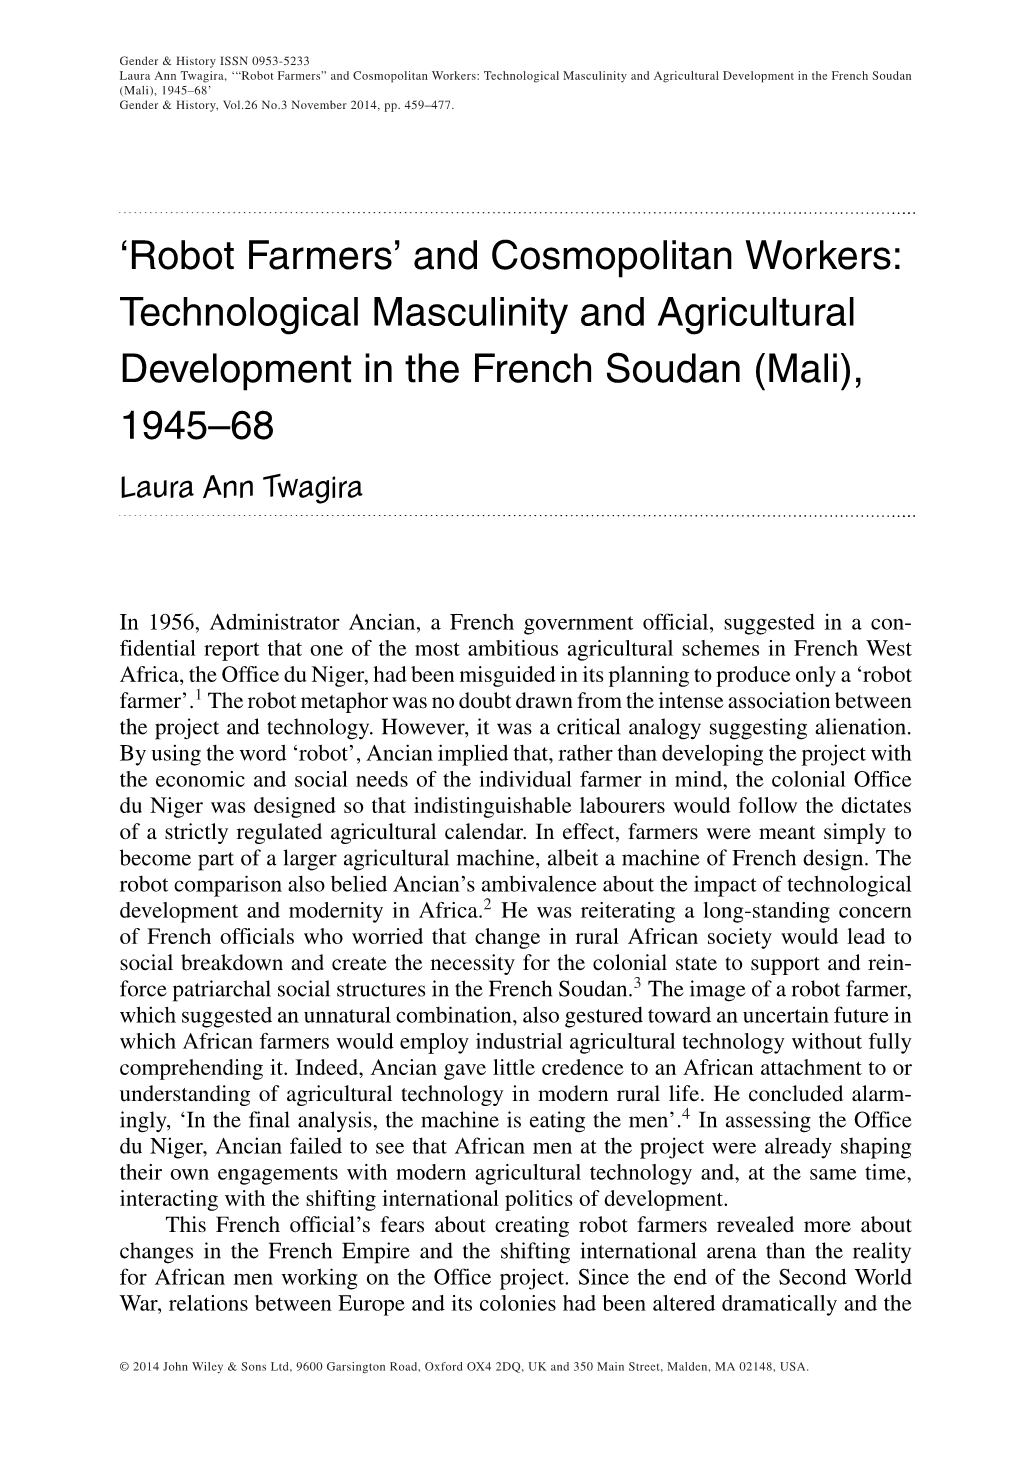 And Cosmopolitan Workers: Technological Masculinity and Agricultural Development in the French Soudan (Mali), 1945–68’ Gender & History, Vol.26 No.3 November 2014, Pp